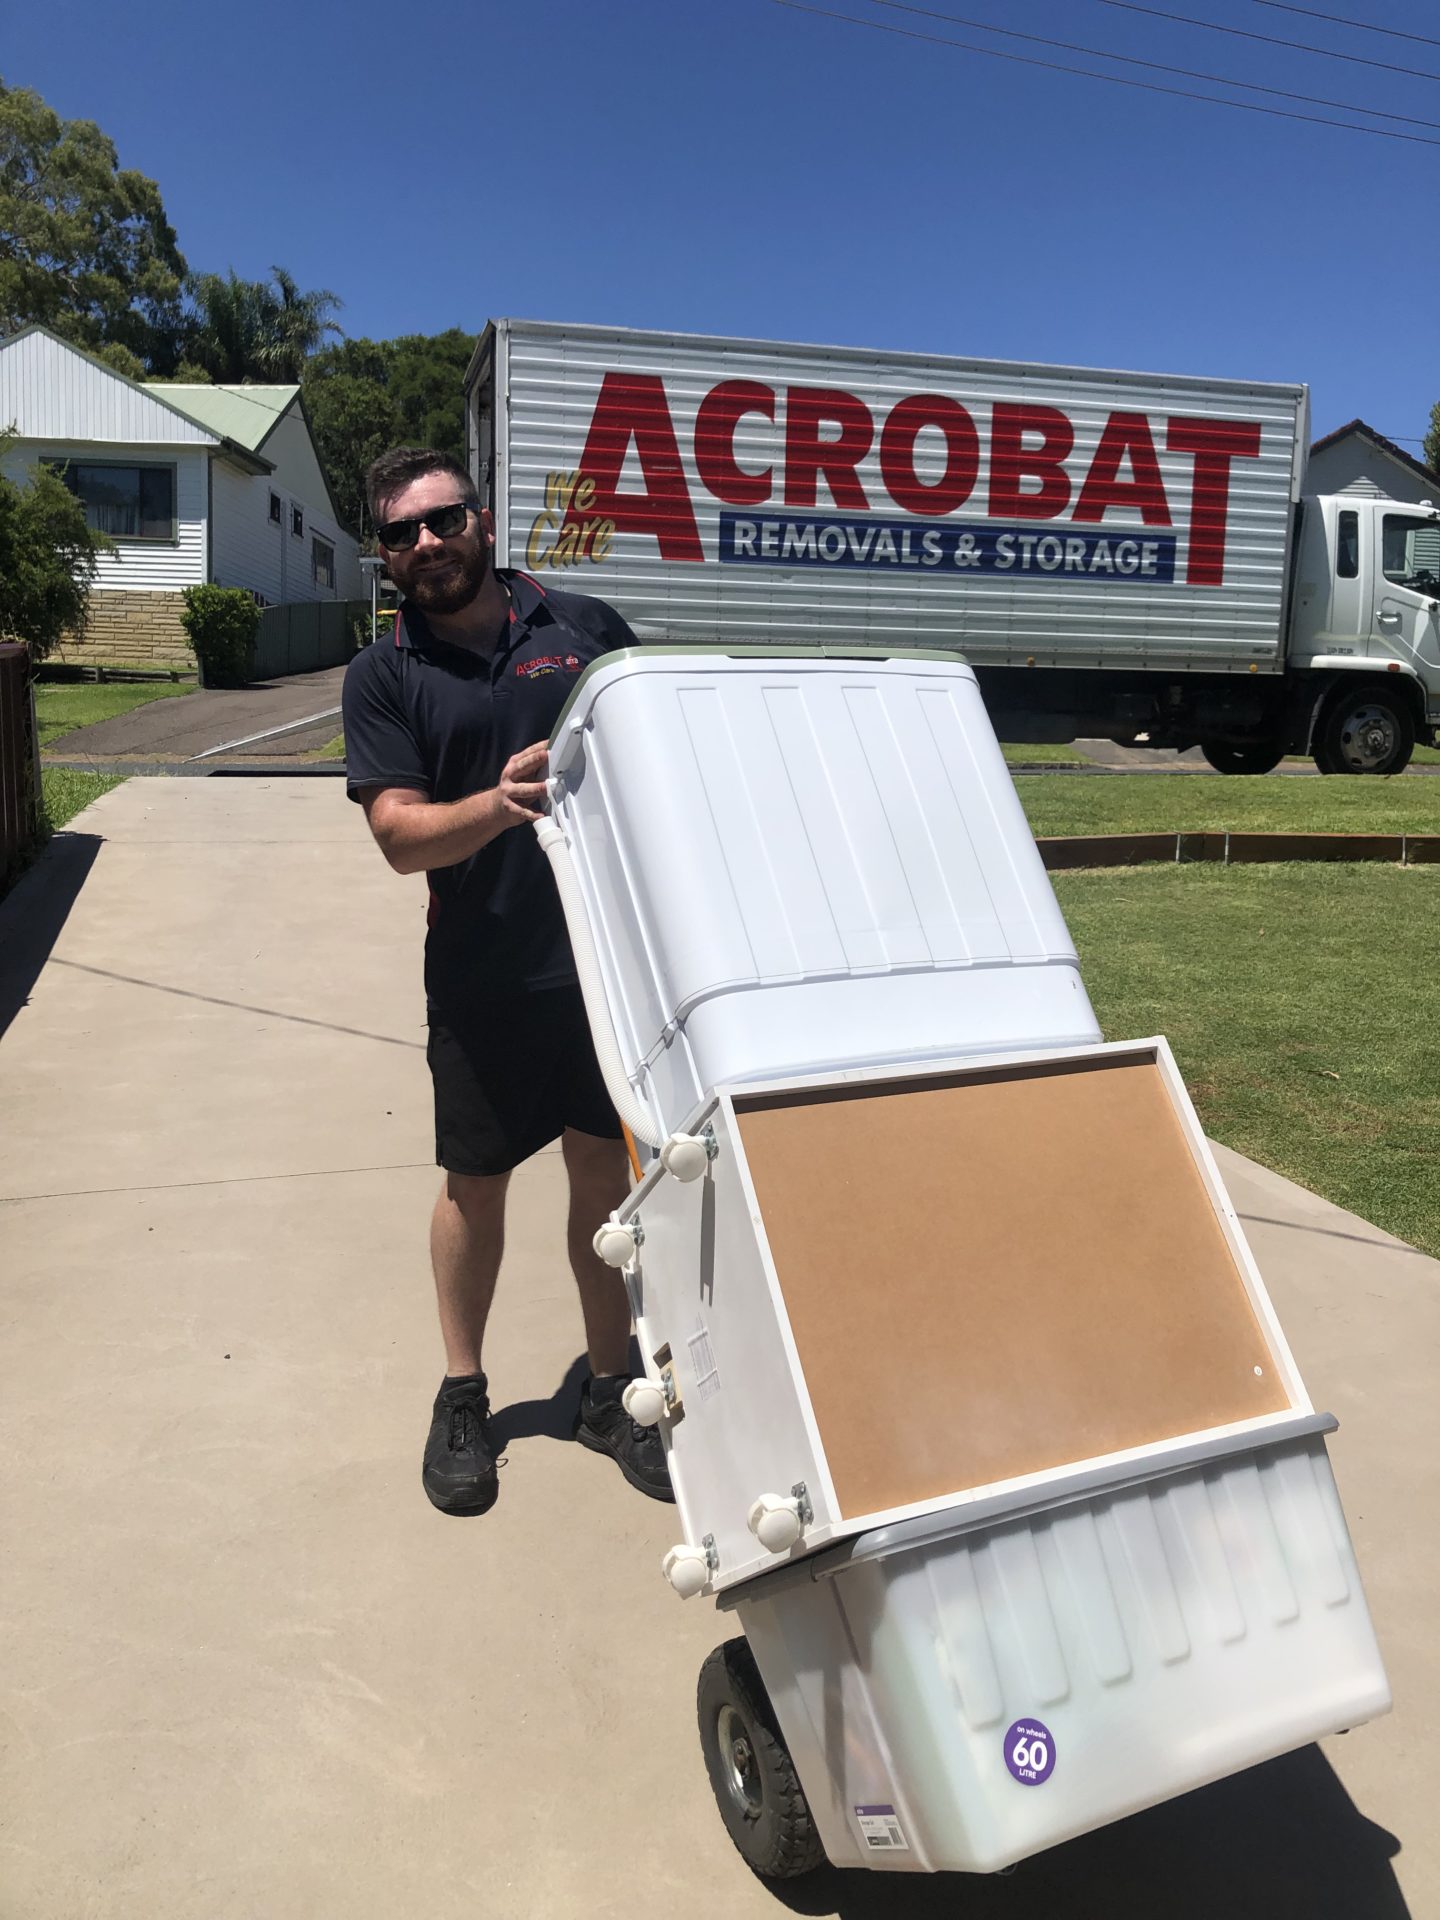 Removalist Driver, Removalist Driver Opportunities, Acrobat Removals &amp; Storage